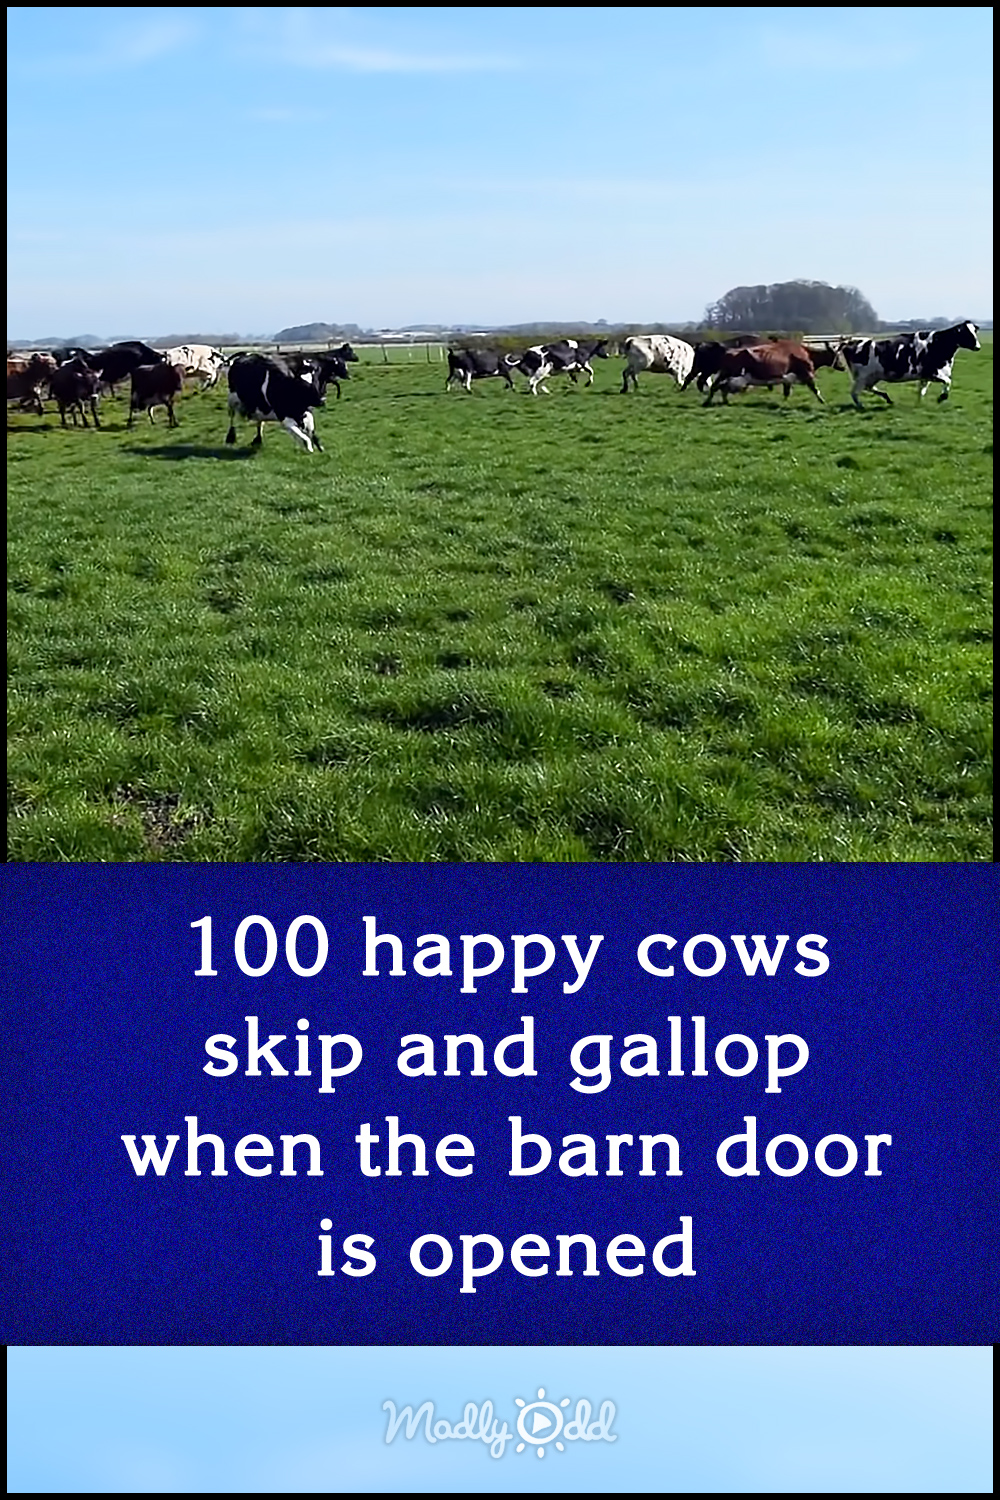 100 happy cows skip and gallop when the barn door is opened